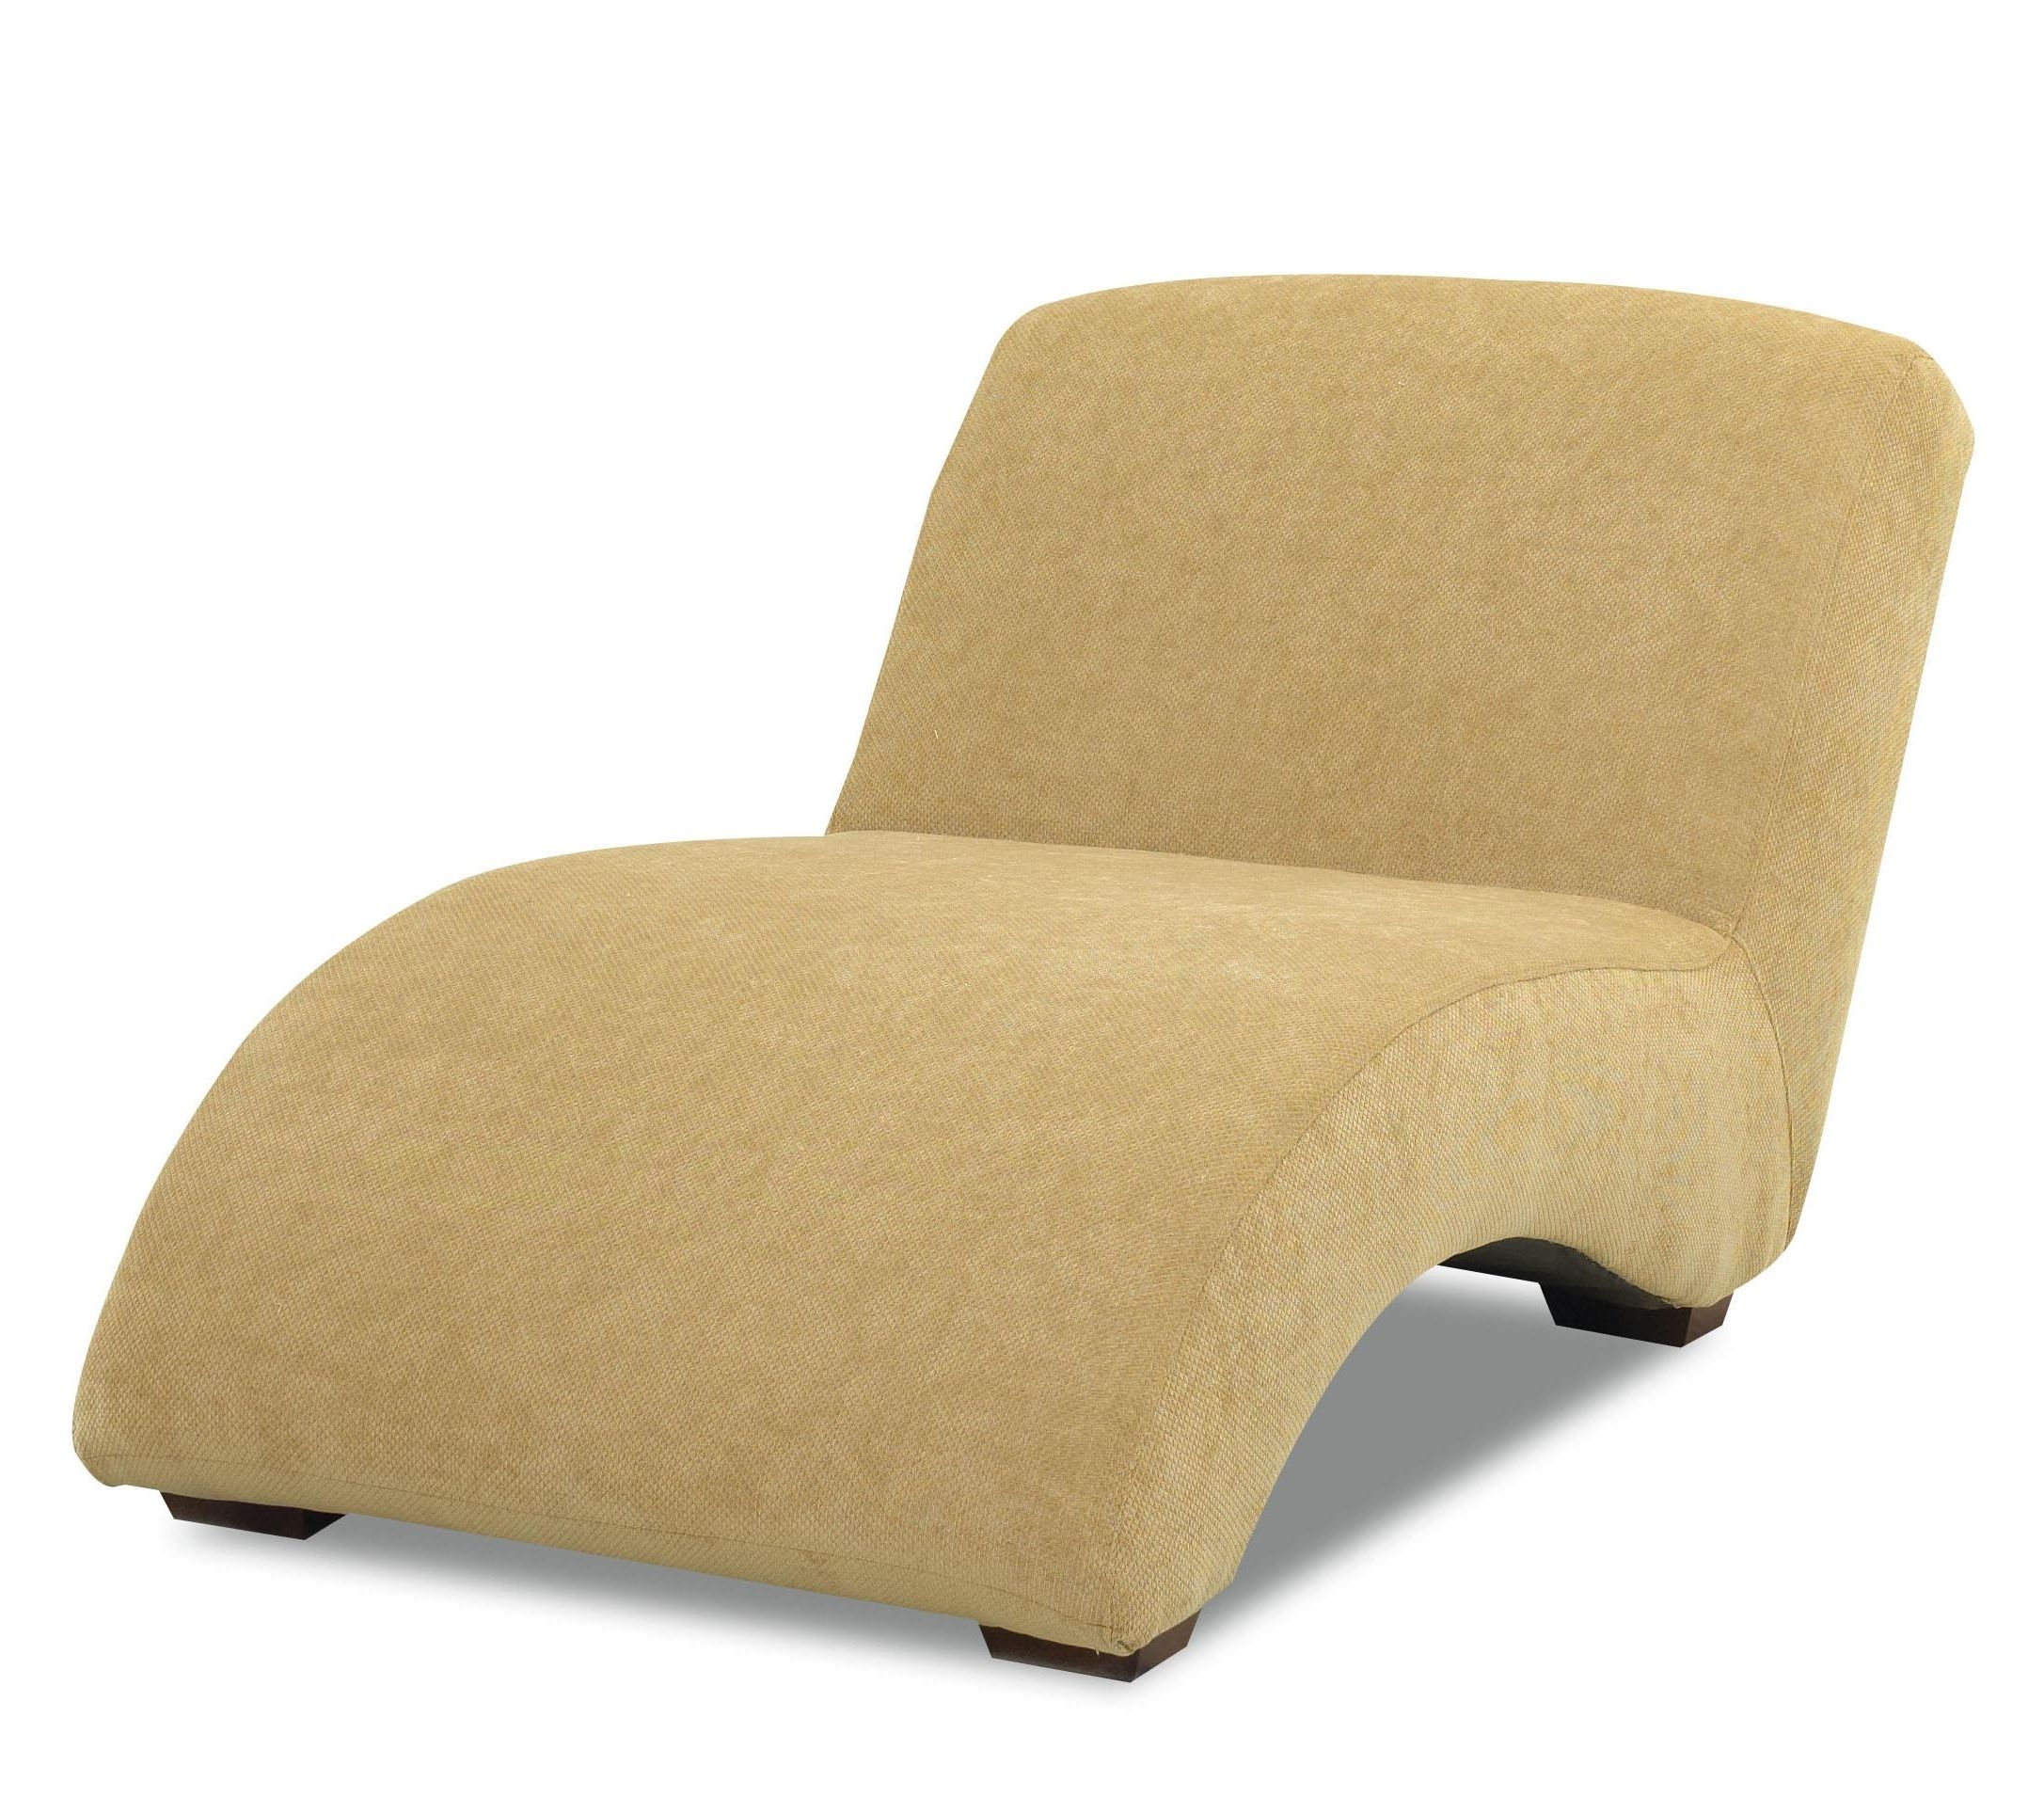 Klaussner Chaise Lounge Chairs With Well Liked Klaussner Chairs And Accents Oversized Celebration Armless Chaise (View 11 of 15)